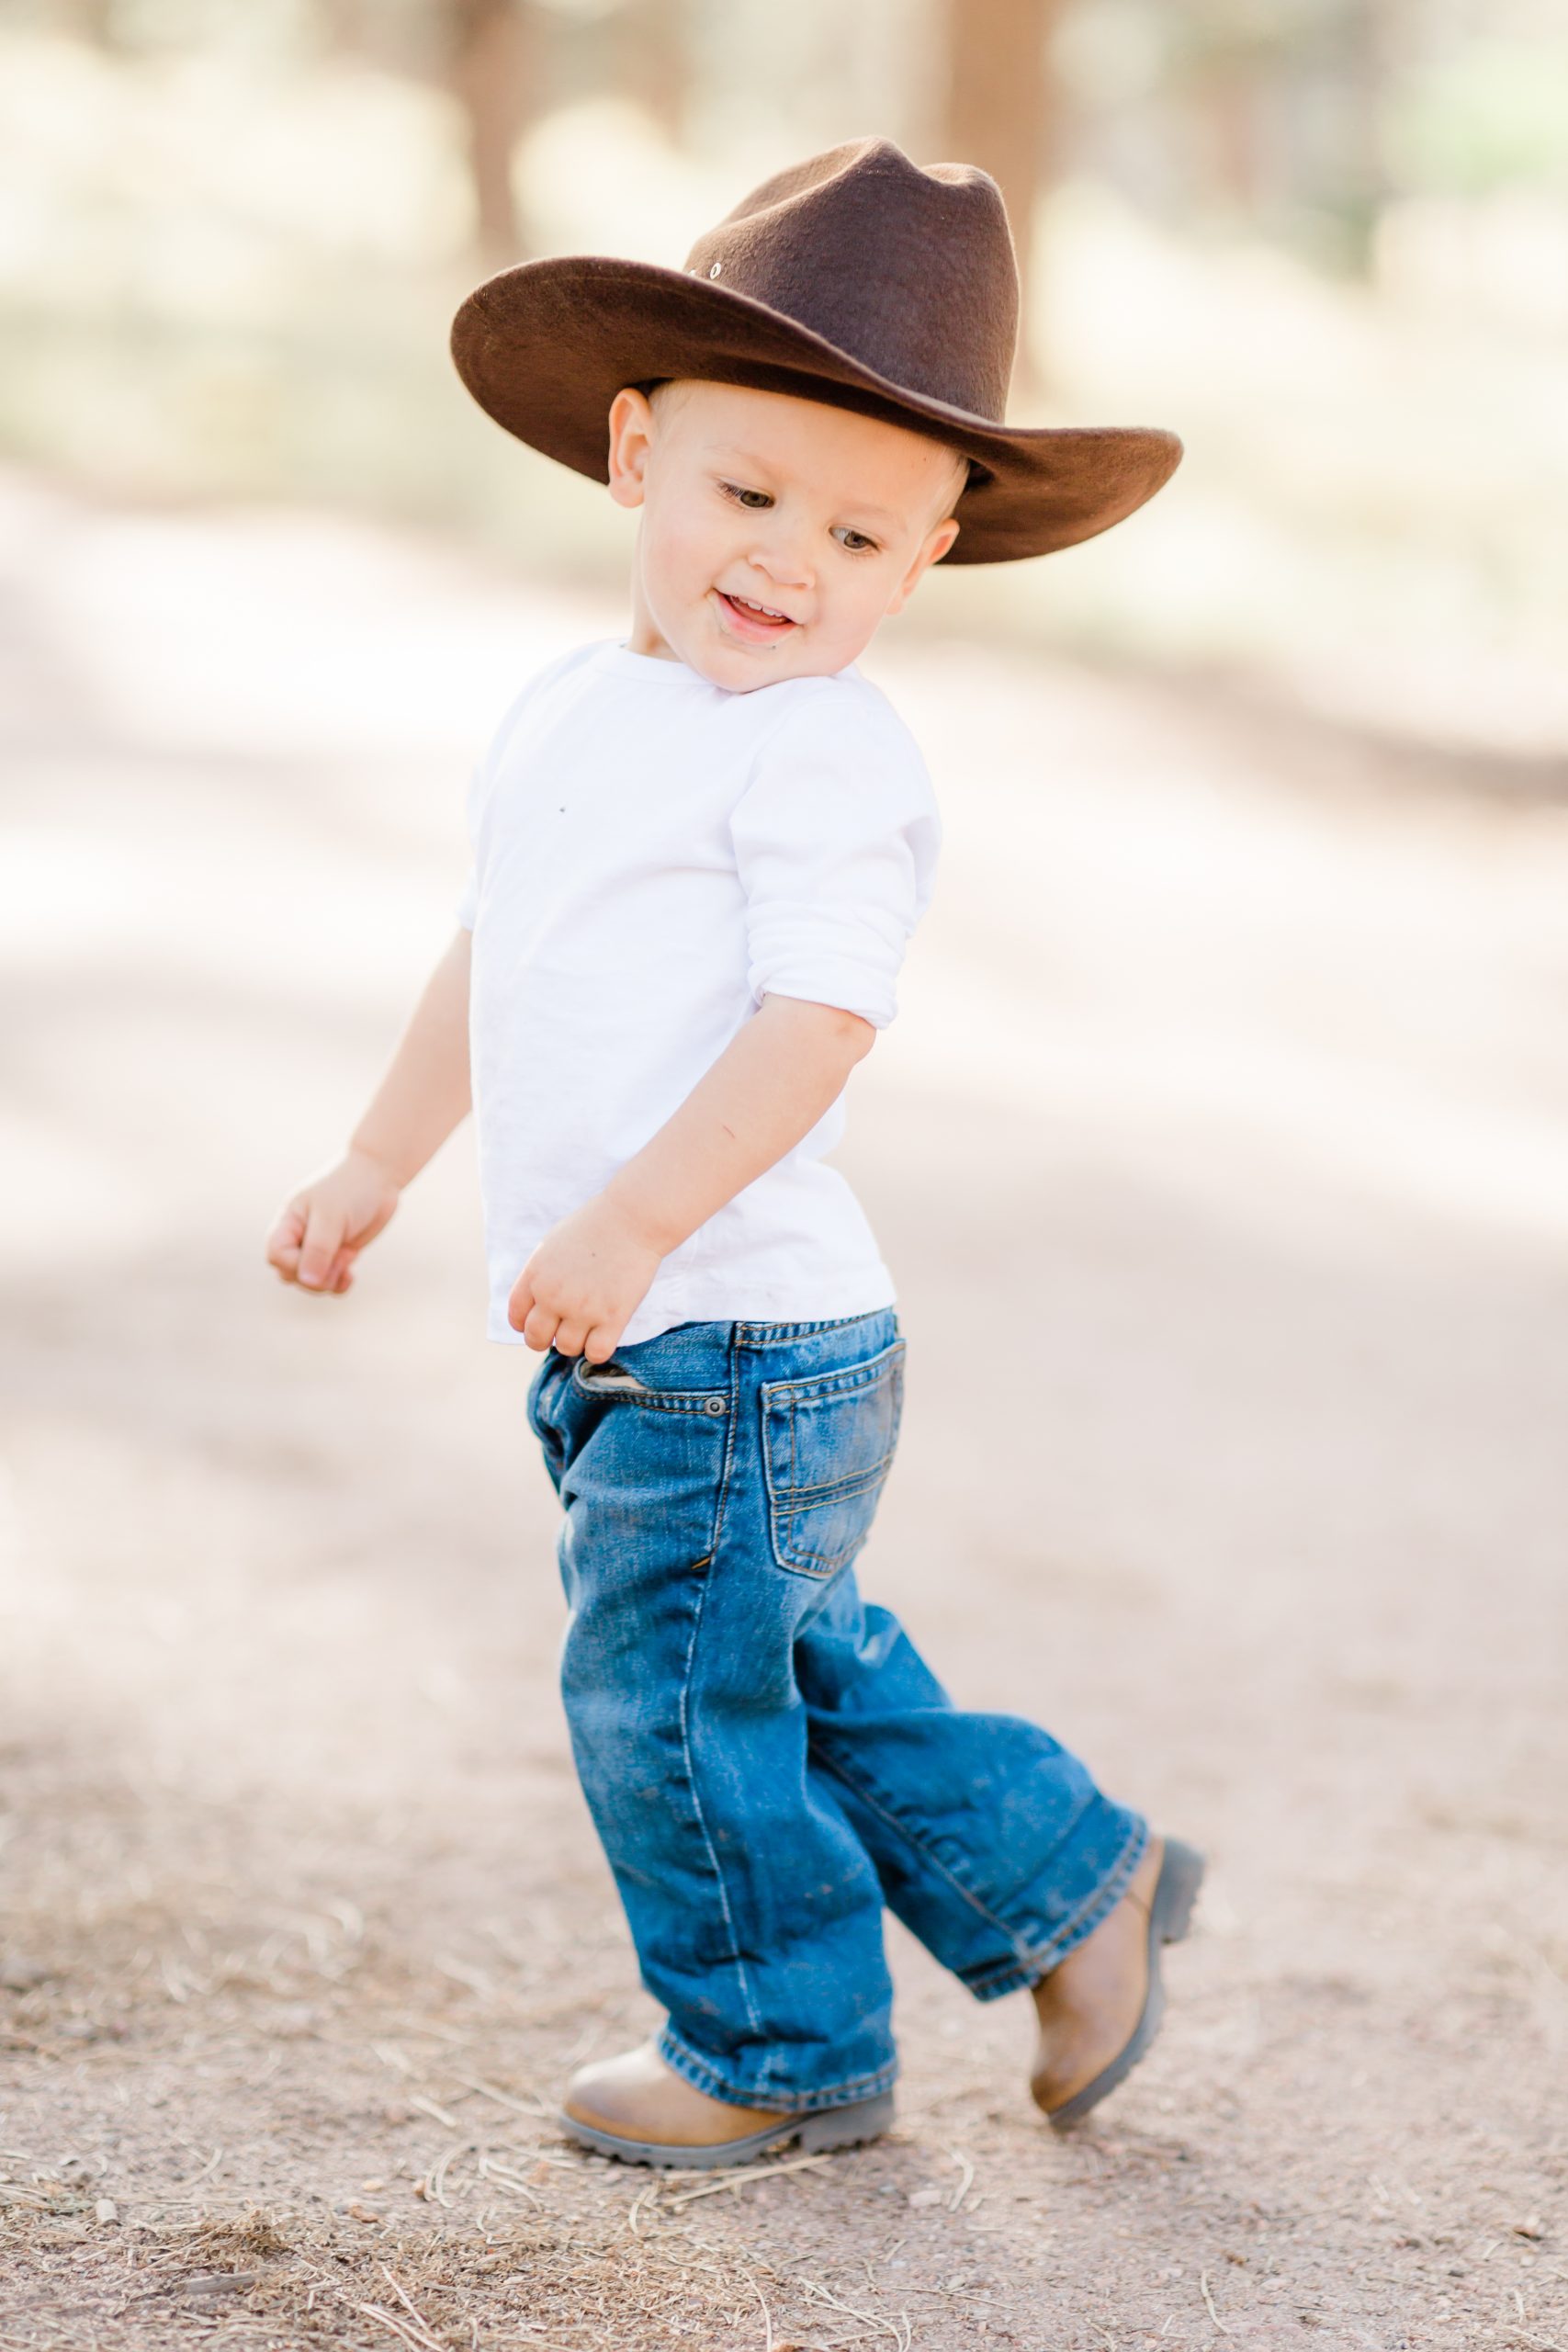 cowboy-themed birthday session with alyssa rachelle photography